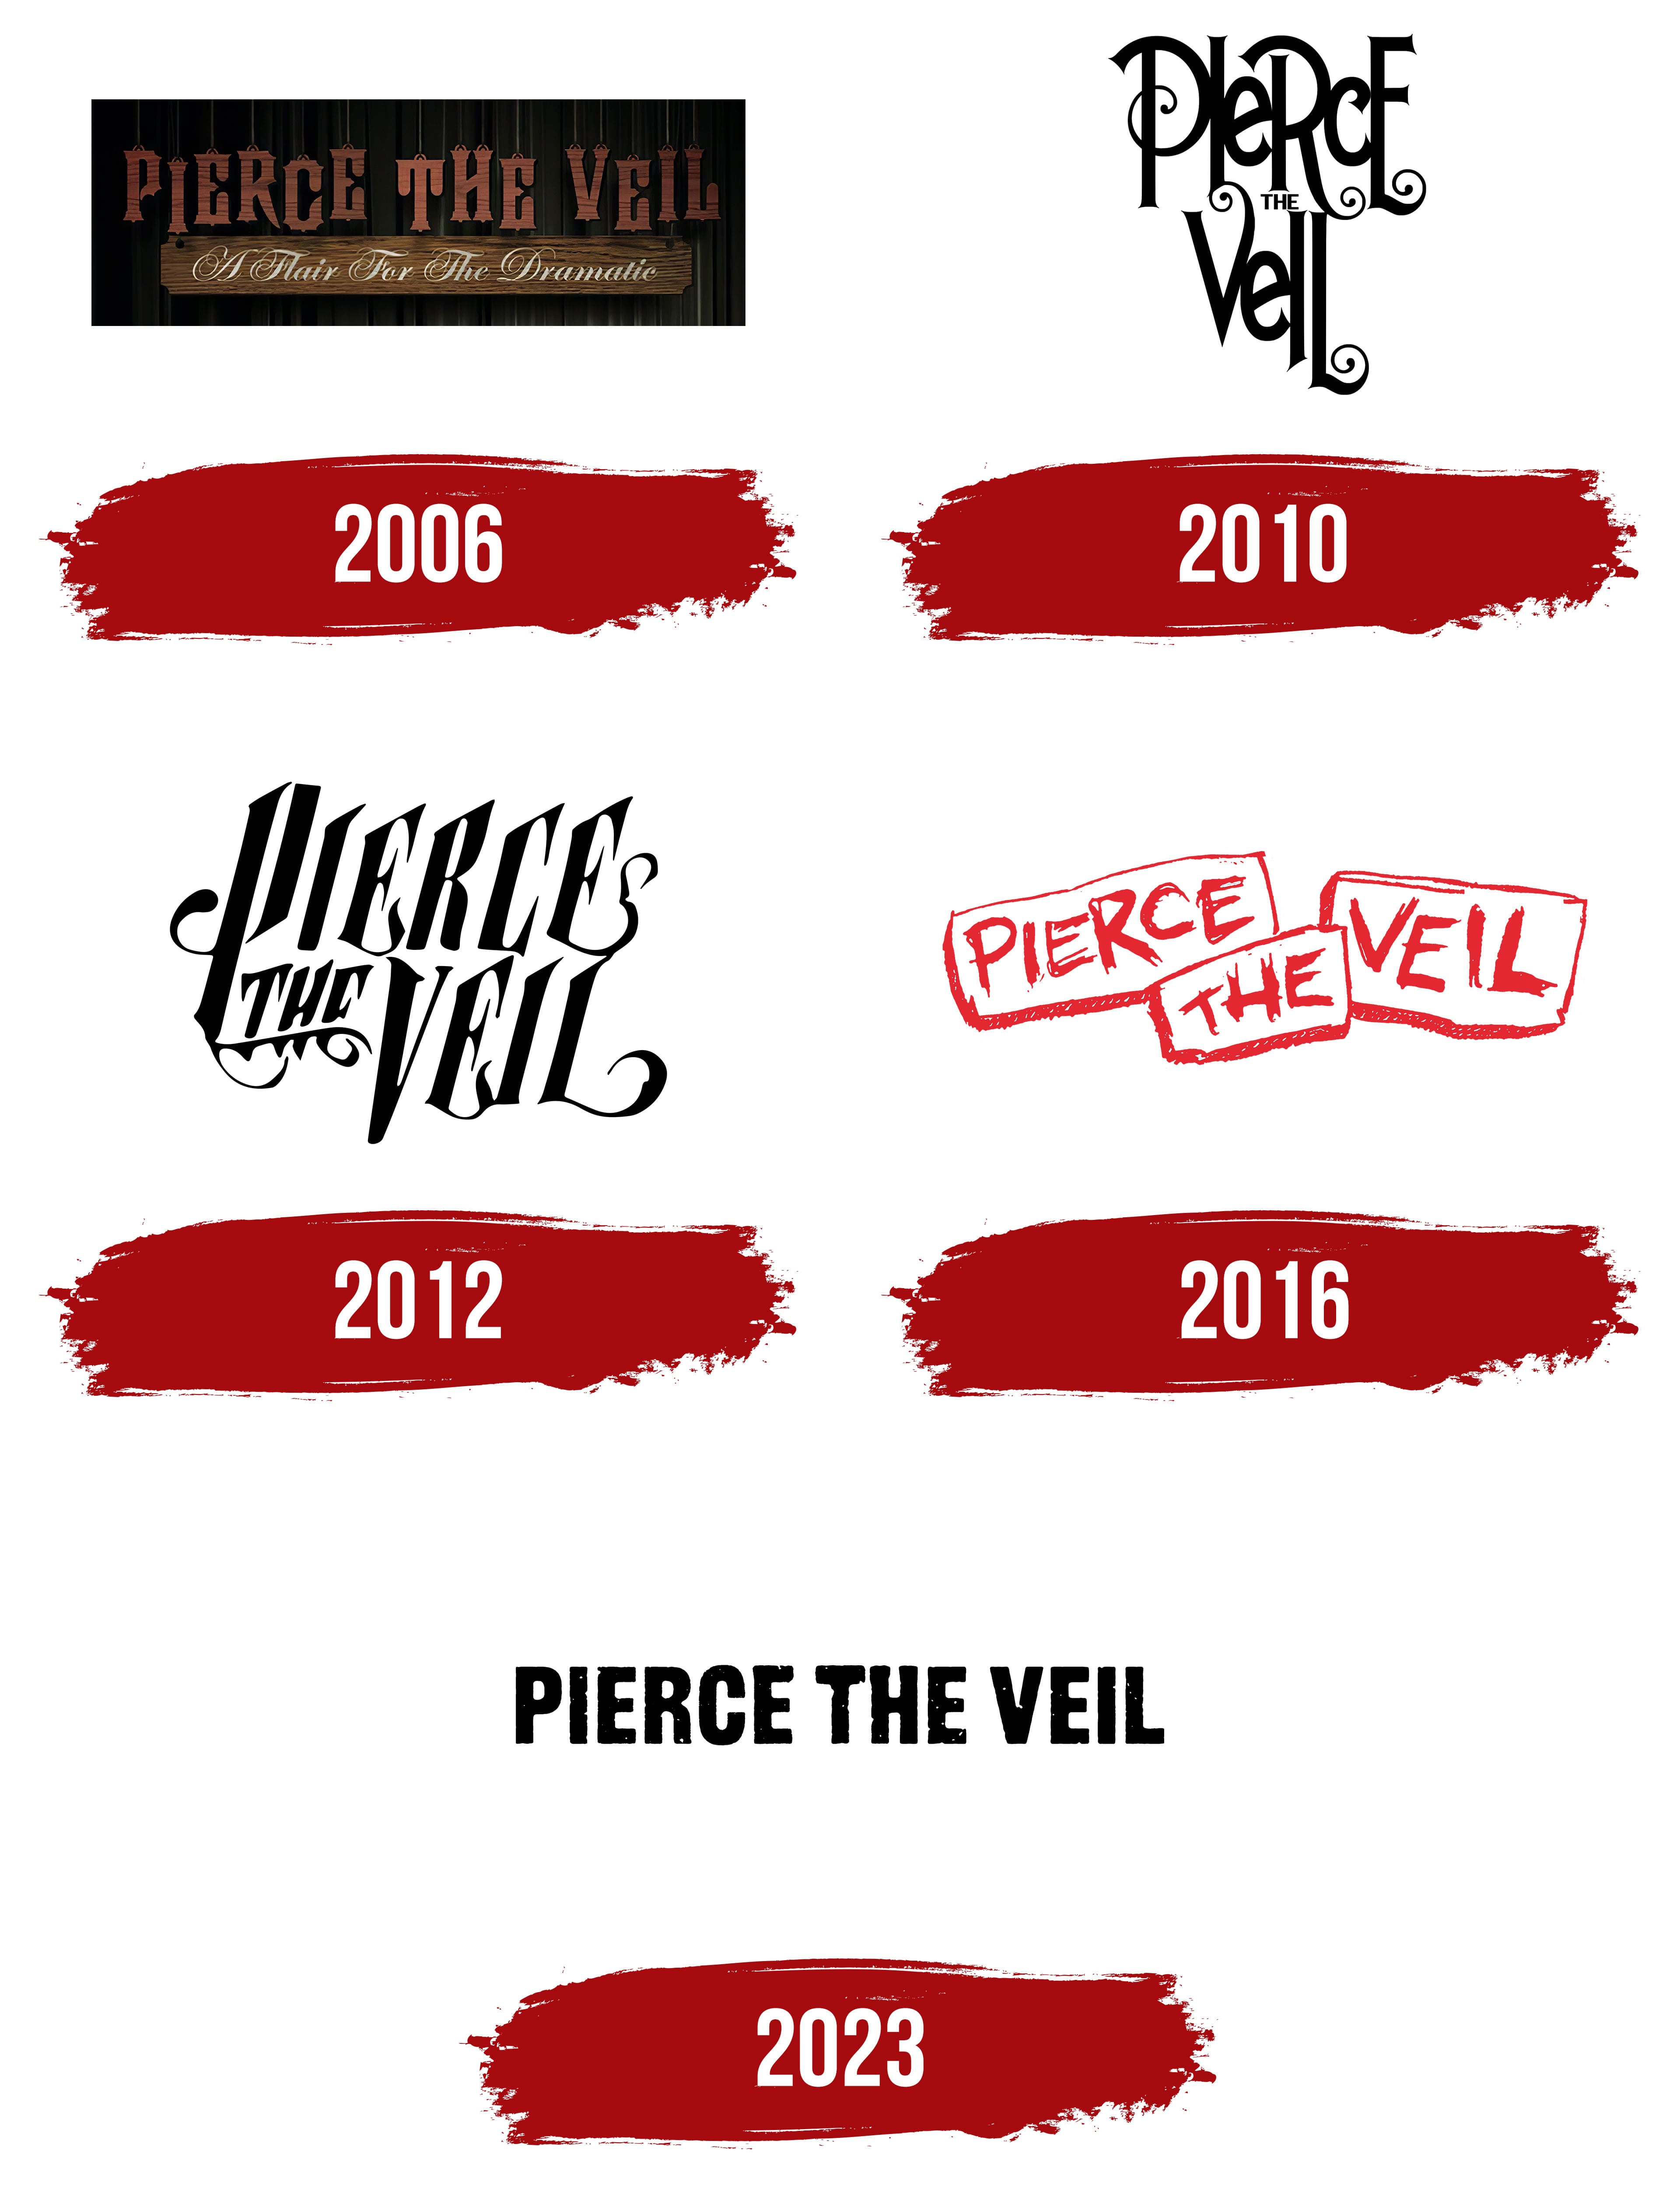 Pierce the Veil Logo, symbol, meaning, history, PNG, brand